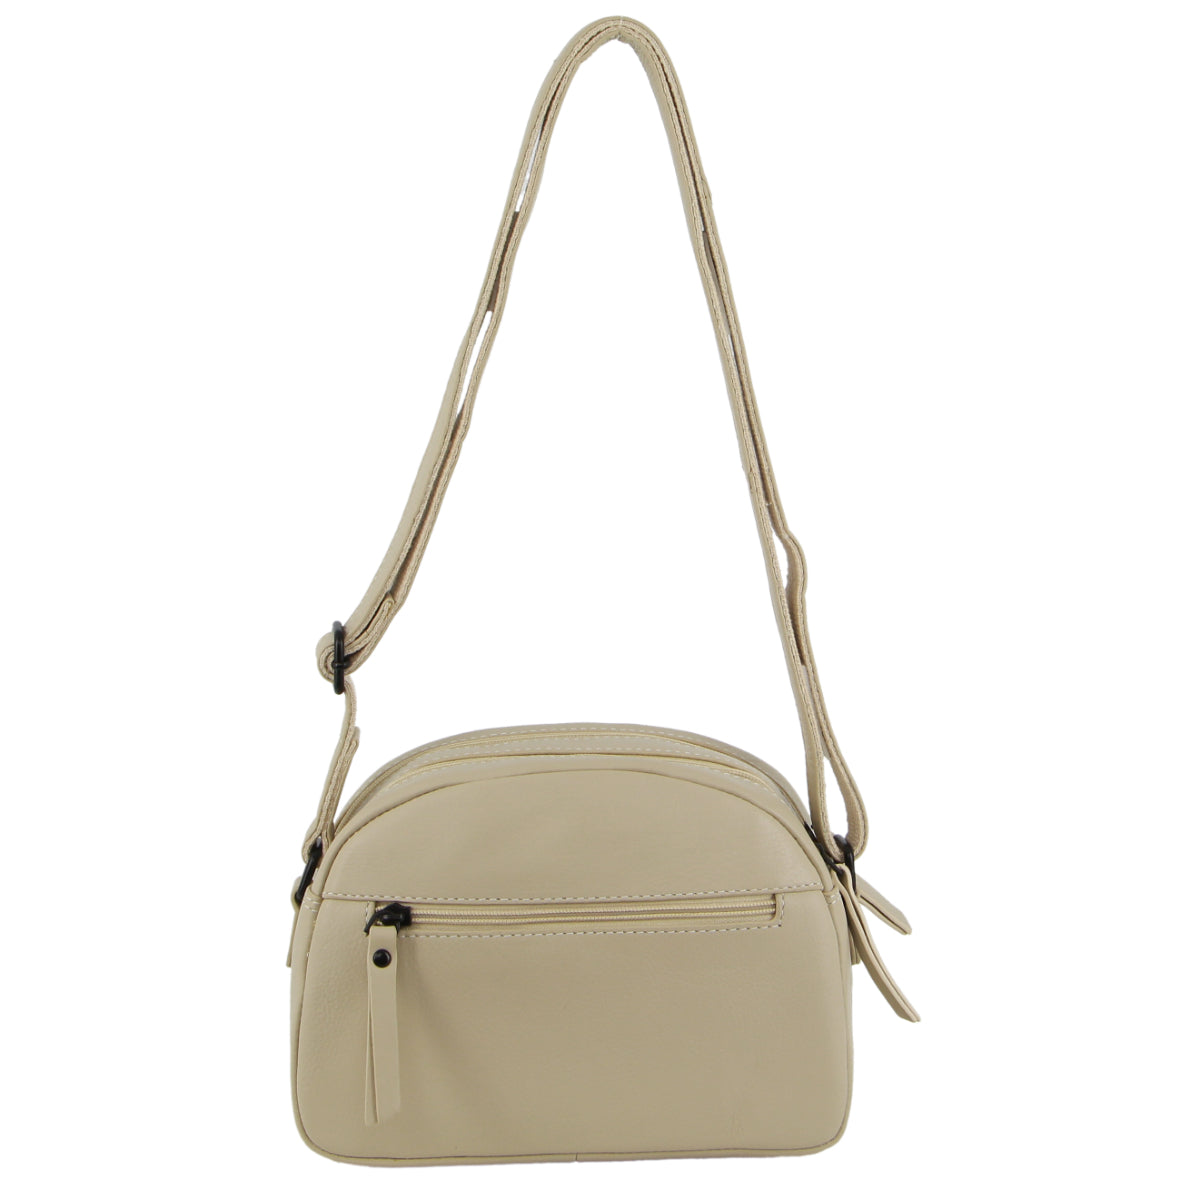 Milleni - NL3869 Small rounded leather sidebag - Cement